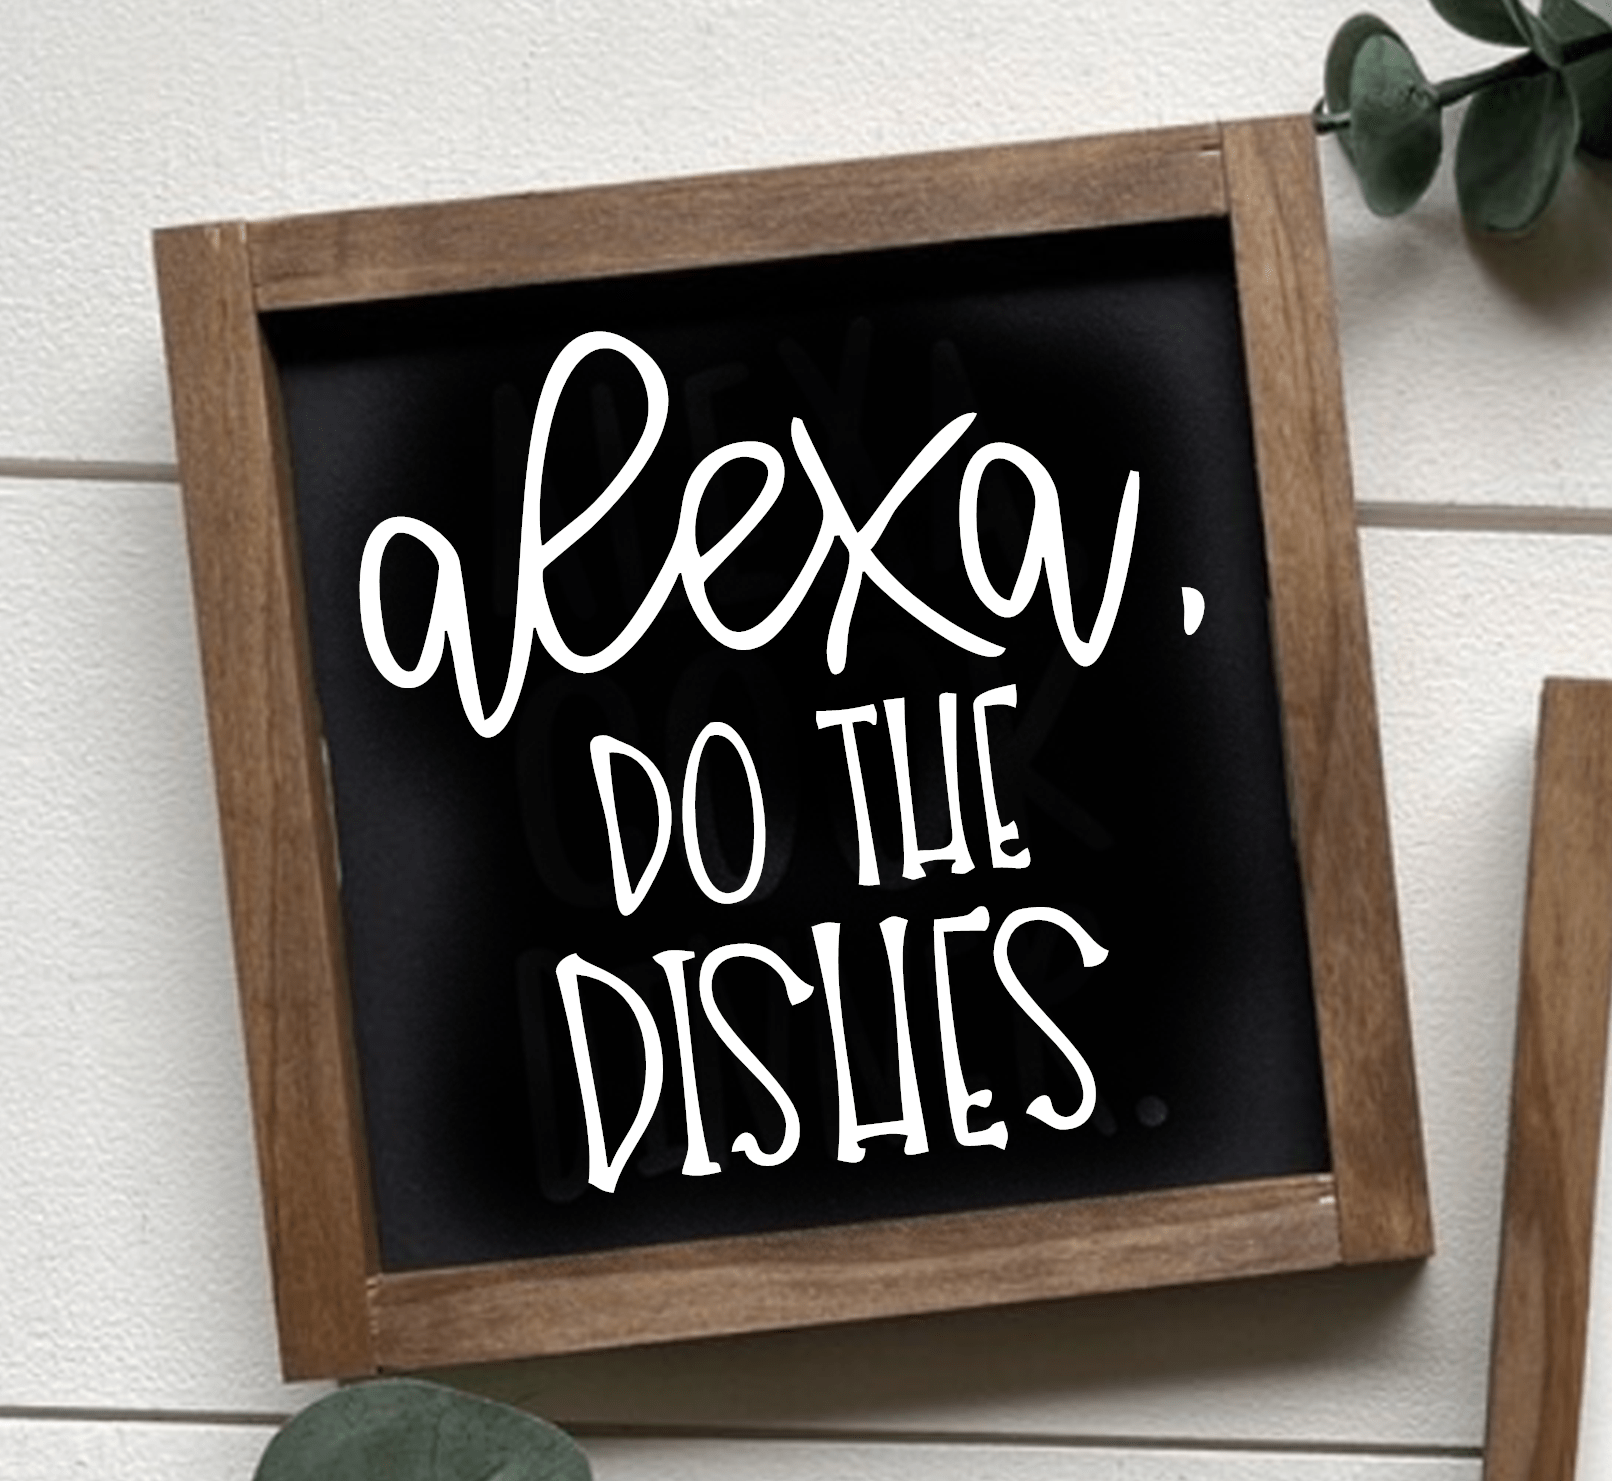 Purple LadyBug Decor Sign Alexa, Do The Dishes Framed Wood Sign | Handcrafted Sign